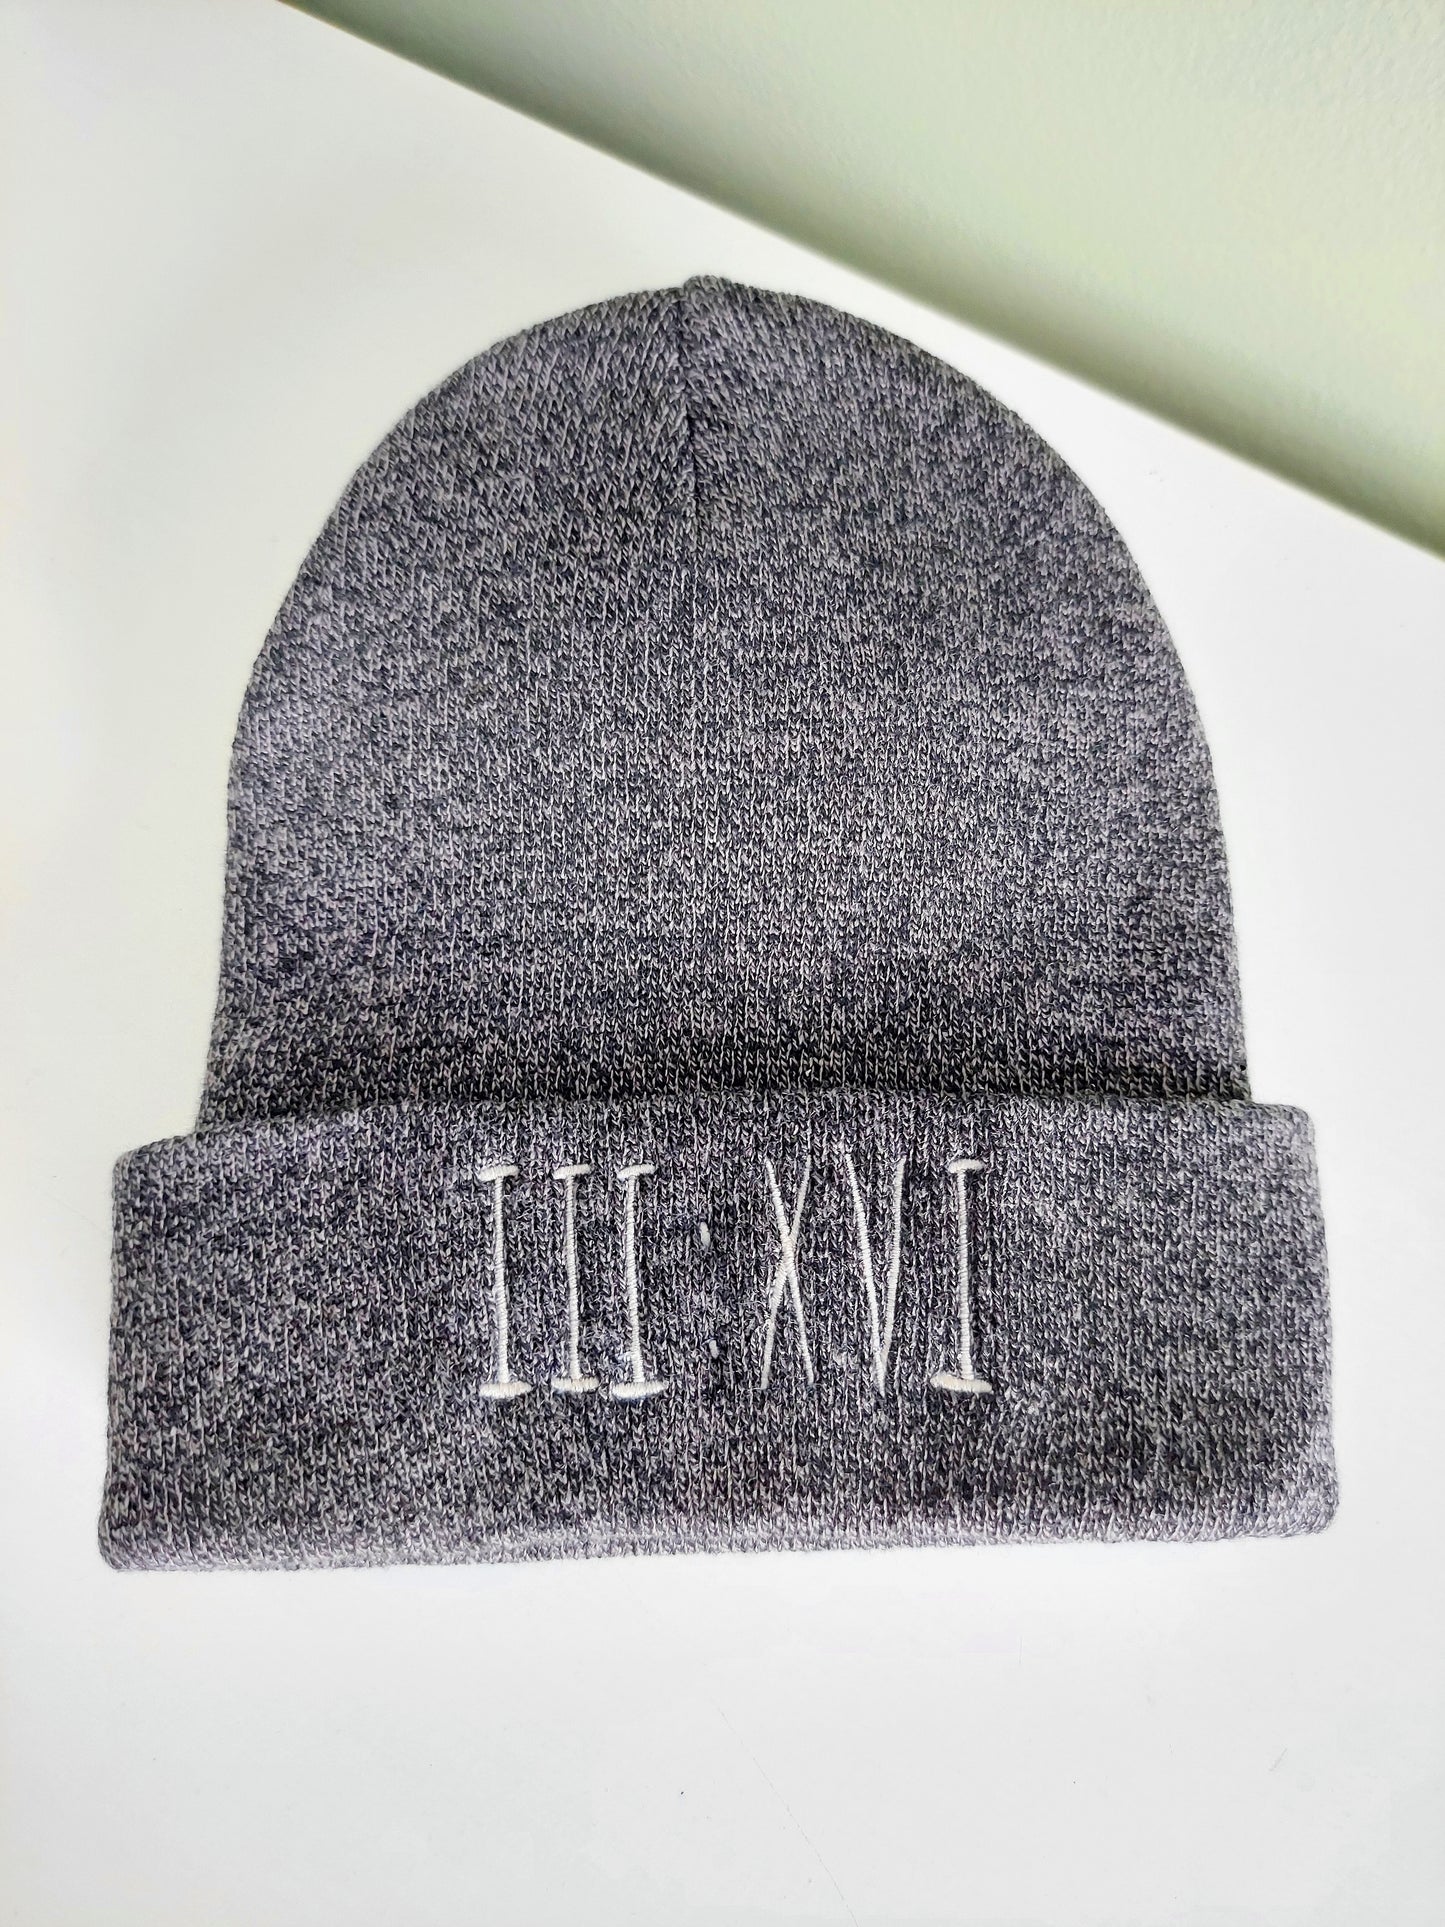 3:16 / Embroidered Beanie